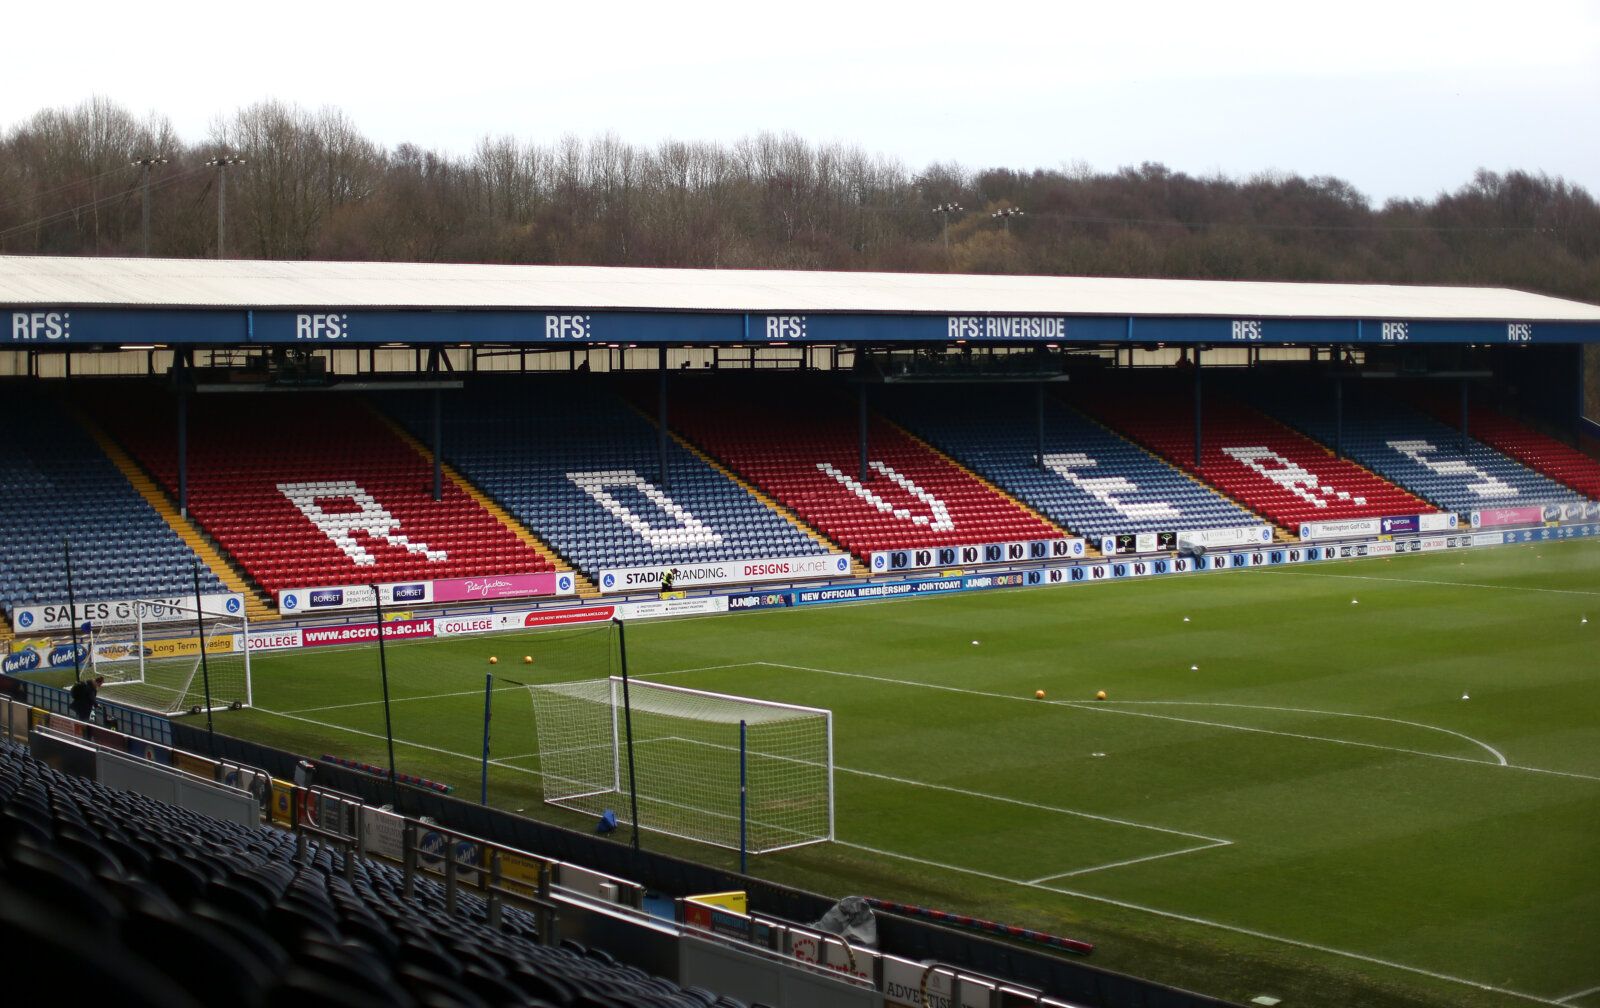 BLACKBURN, ENGLAND - FEBRUARY 17: General stadium view ahead of the Sky Bet Championship match between Blackburn Rovers and Middlesbrough at Ewood Park on February 17, 2019 in Blackburn, England. (Photo by Jan Kruger/Getty Images)